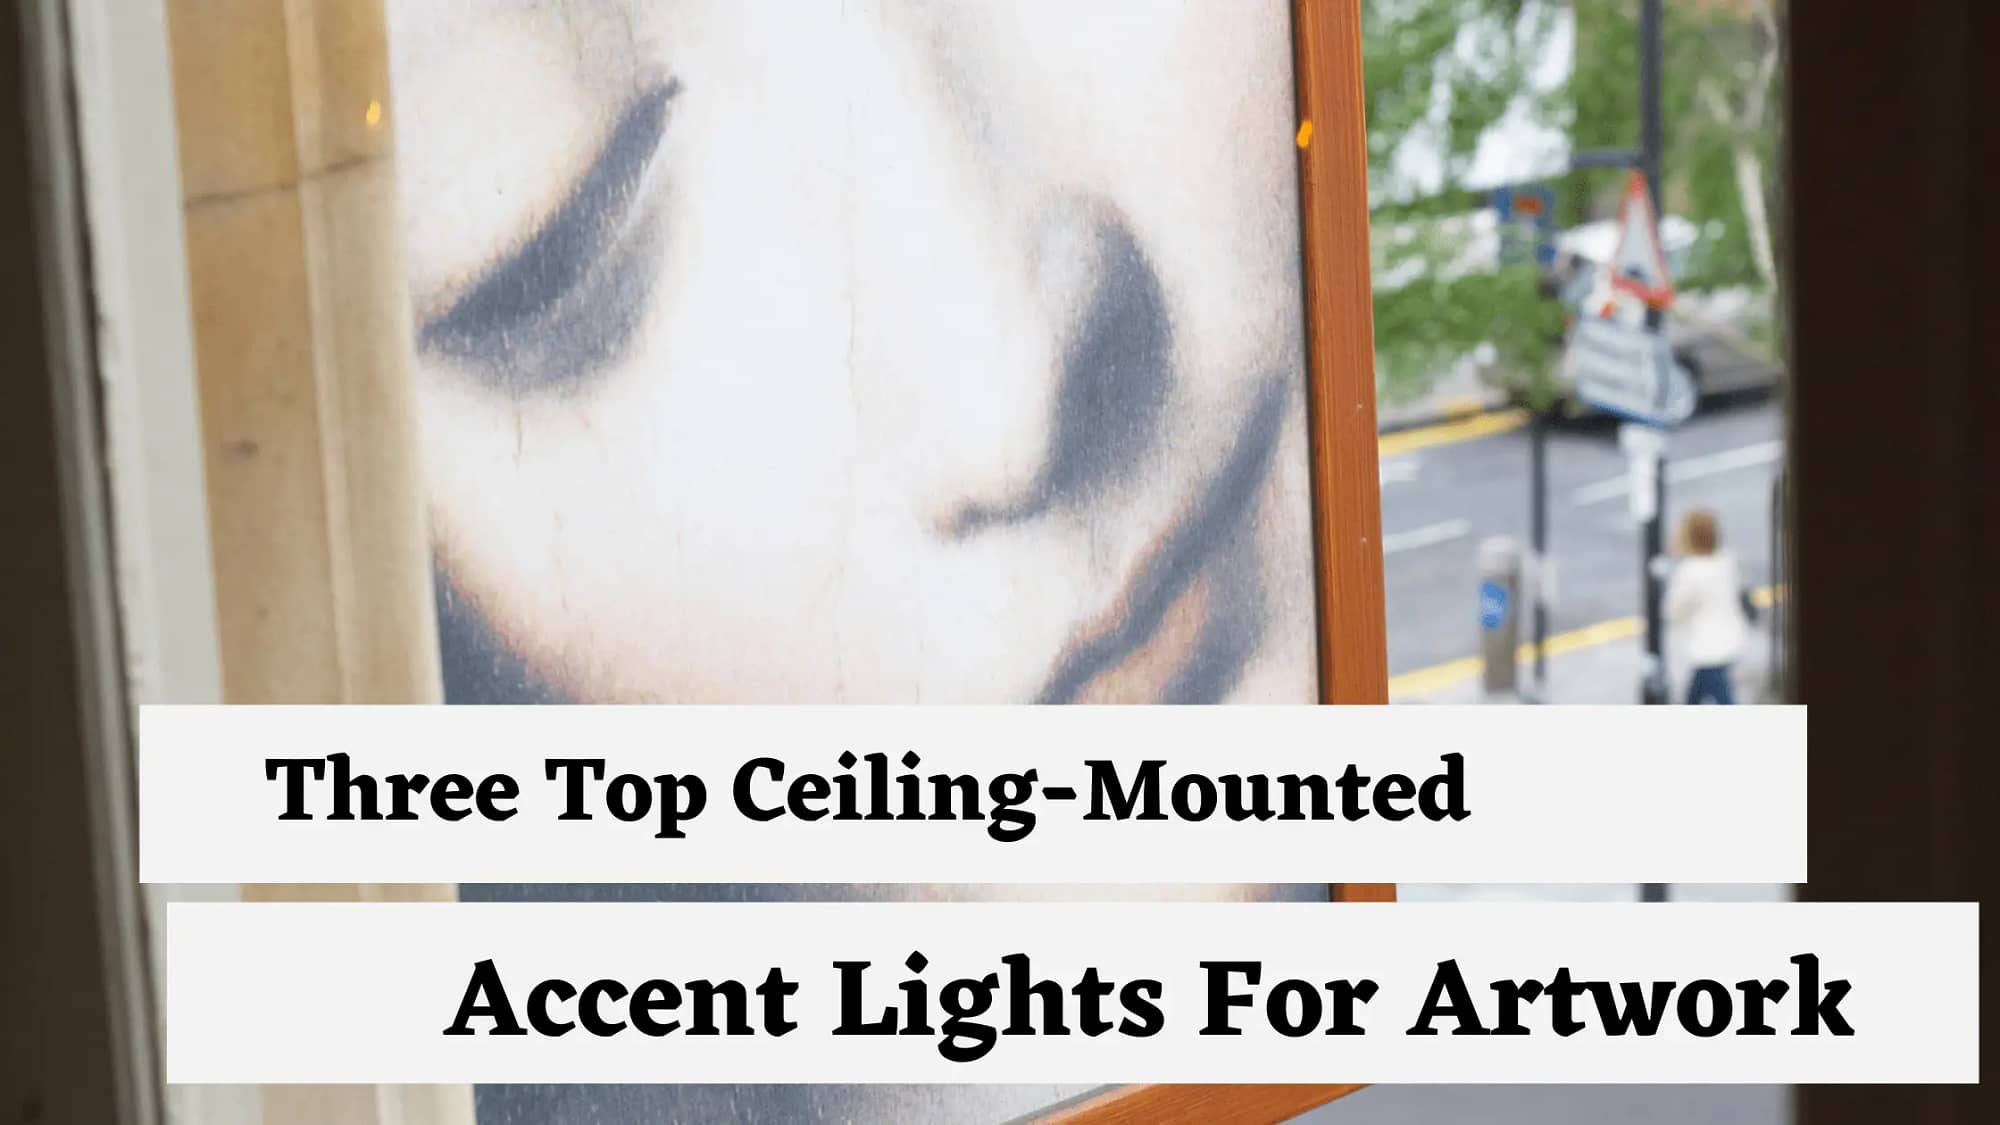 Ceiling-Mounted Accent Lights For Artwork